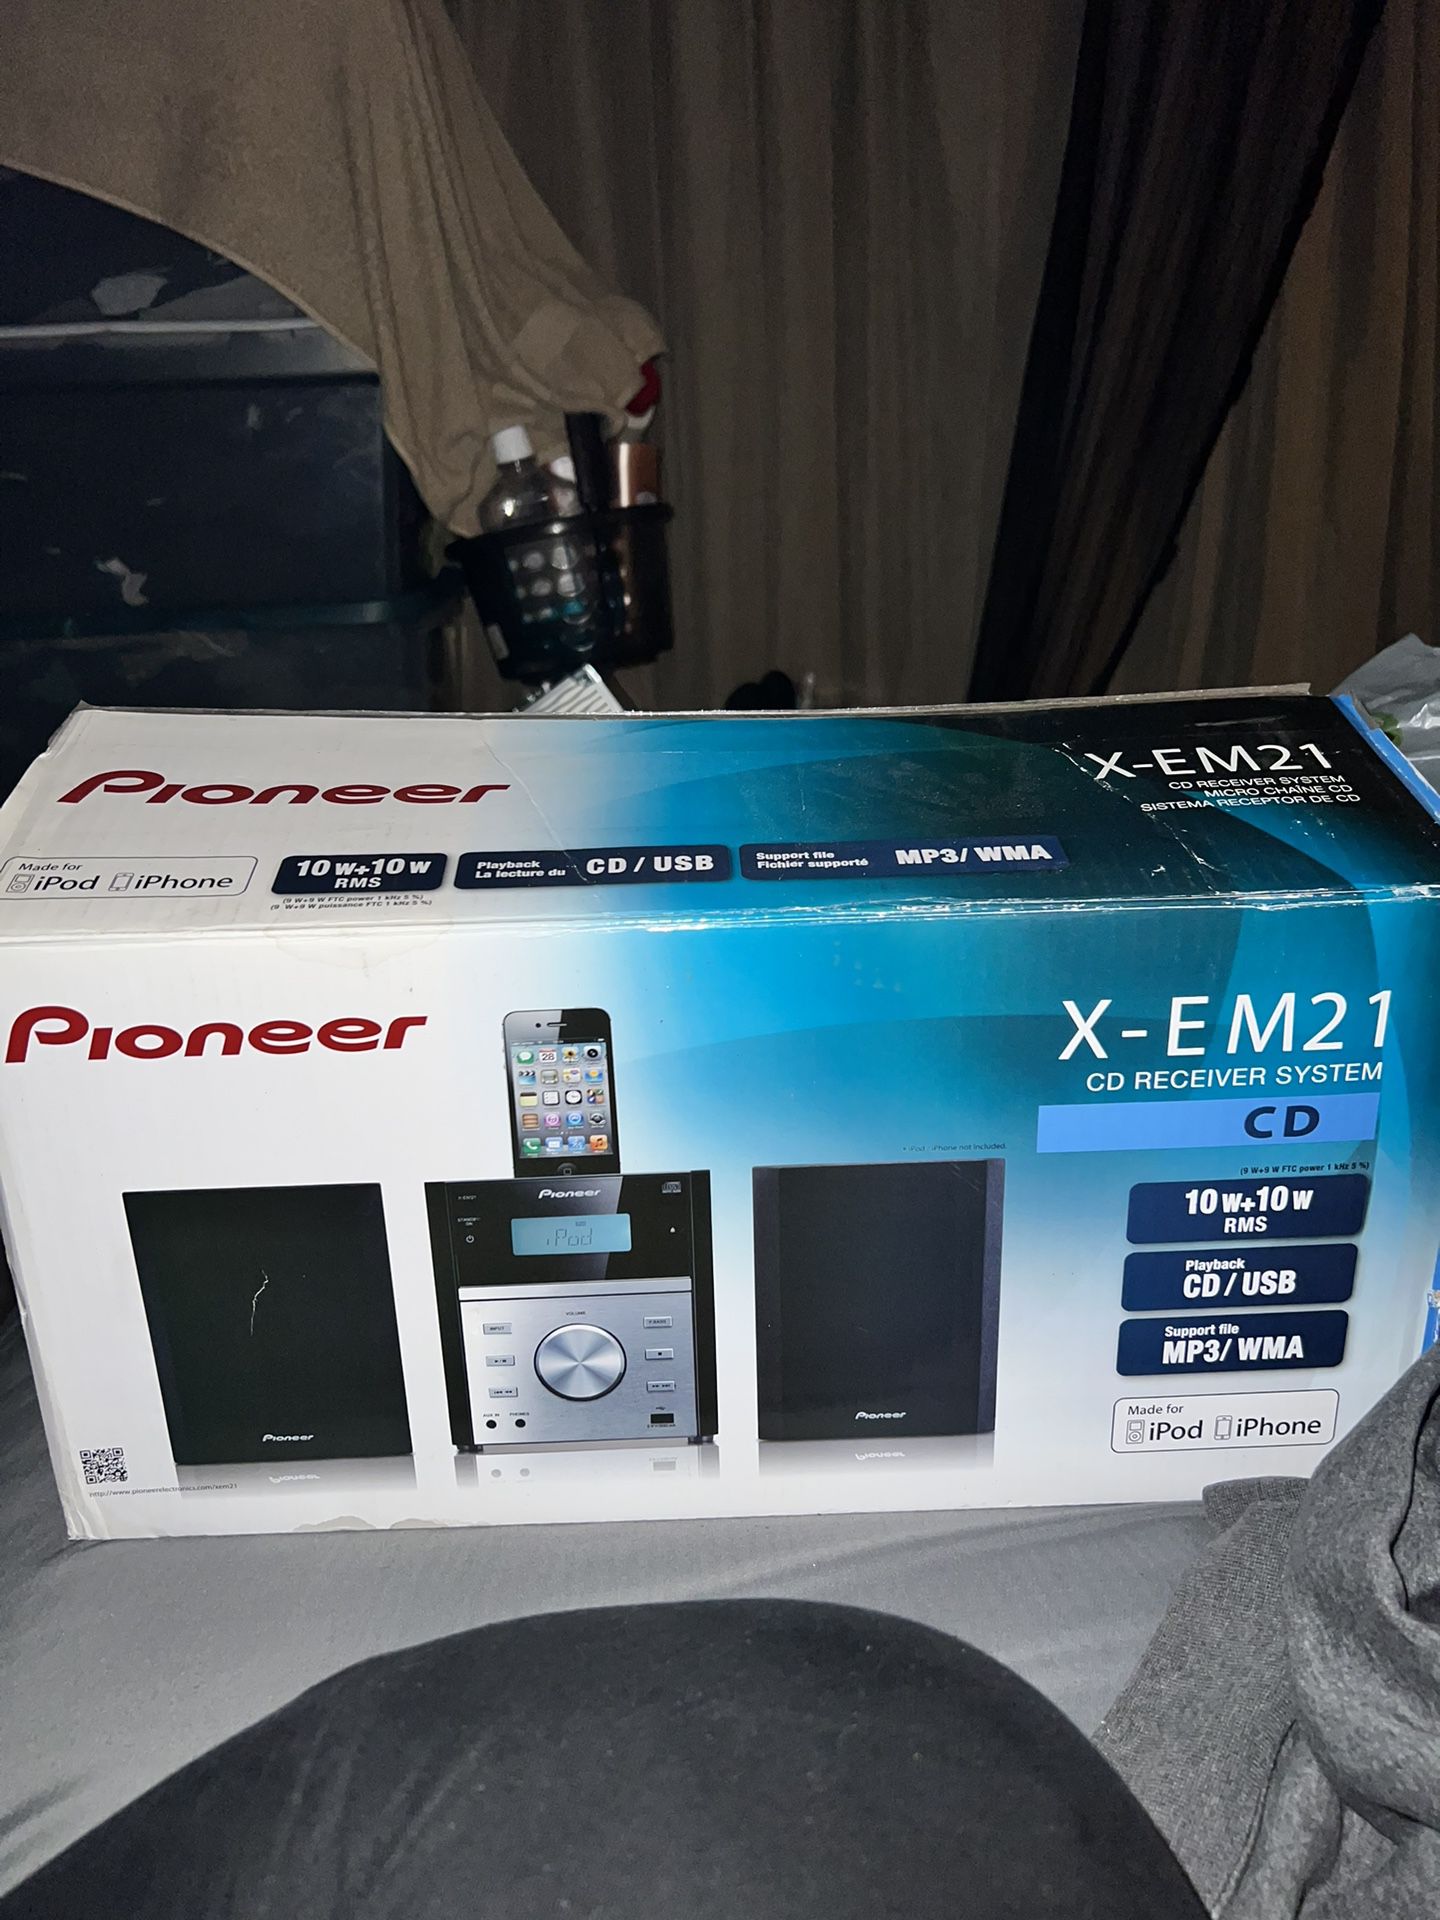 Pioneer X-EM21 Stereo System For Ipods/iPhones 